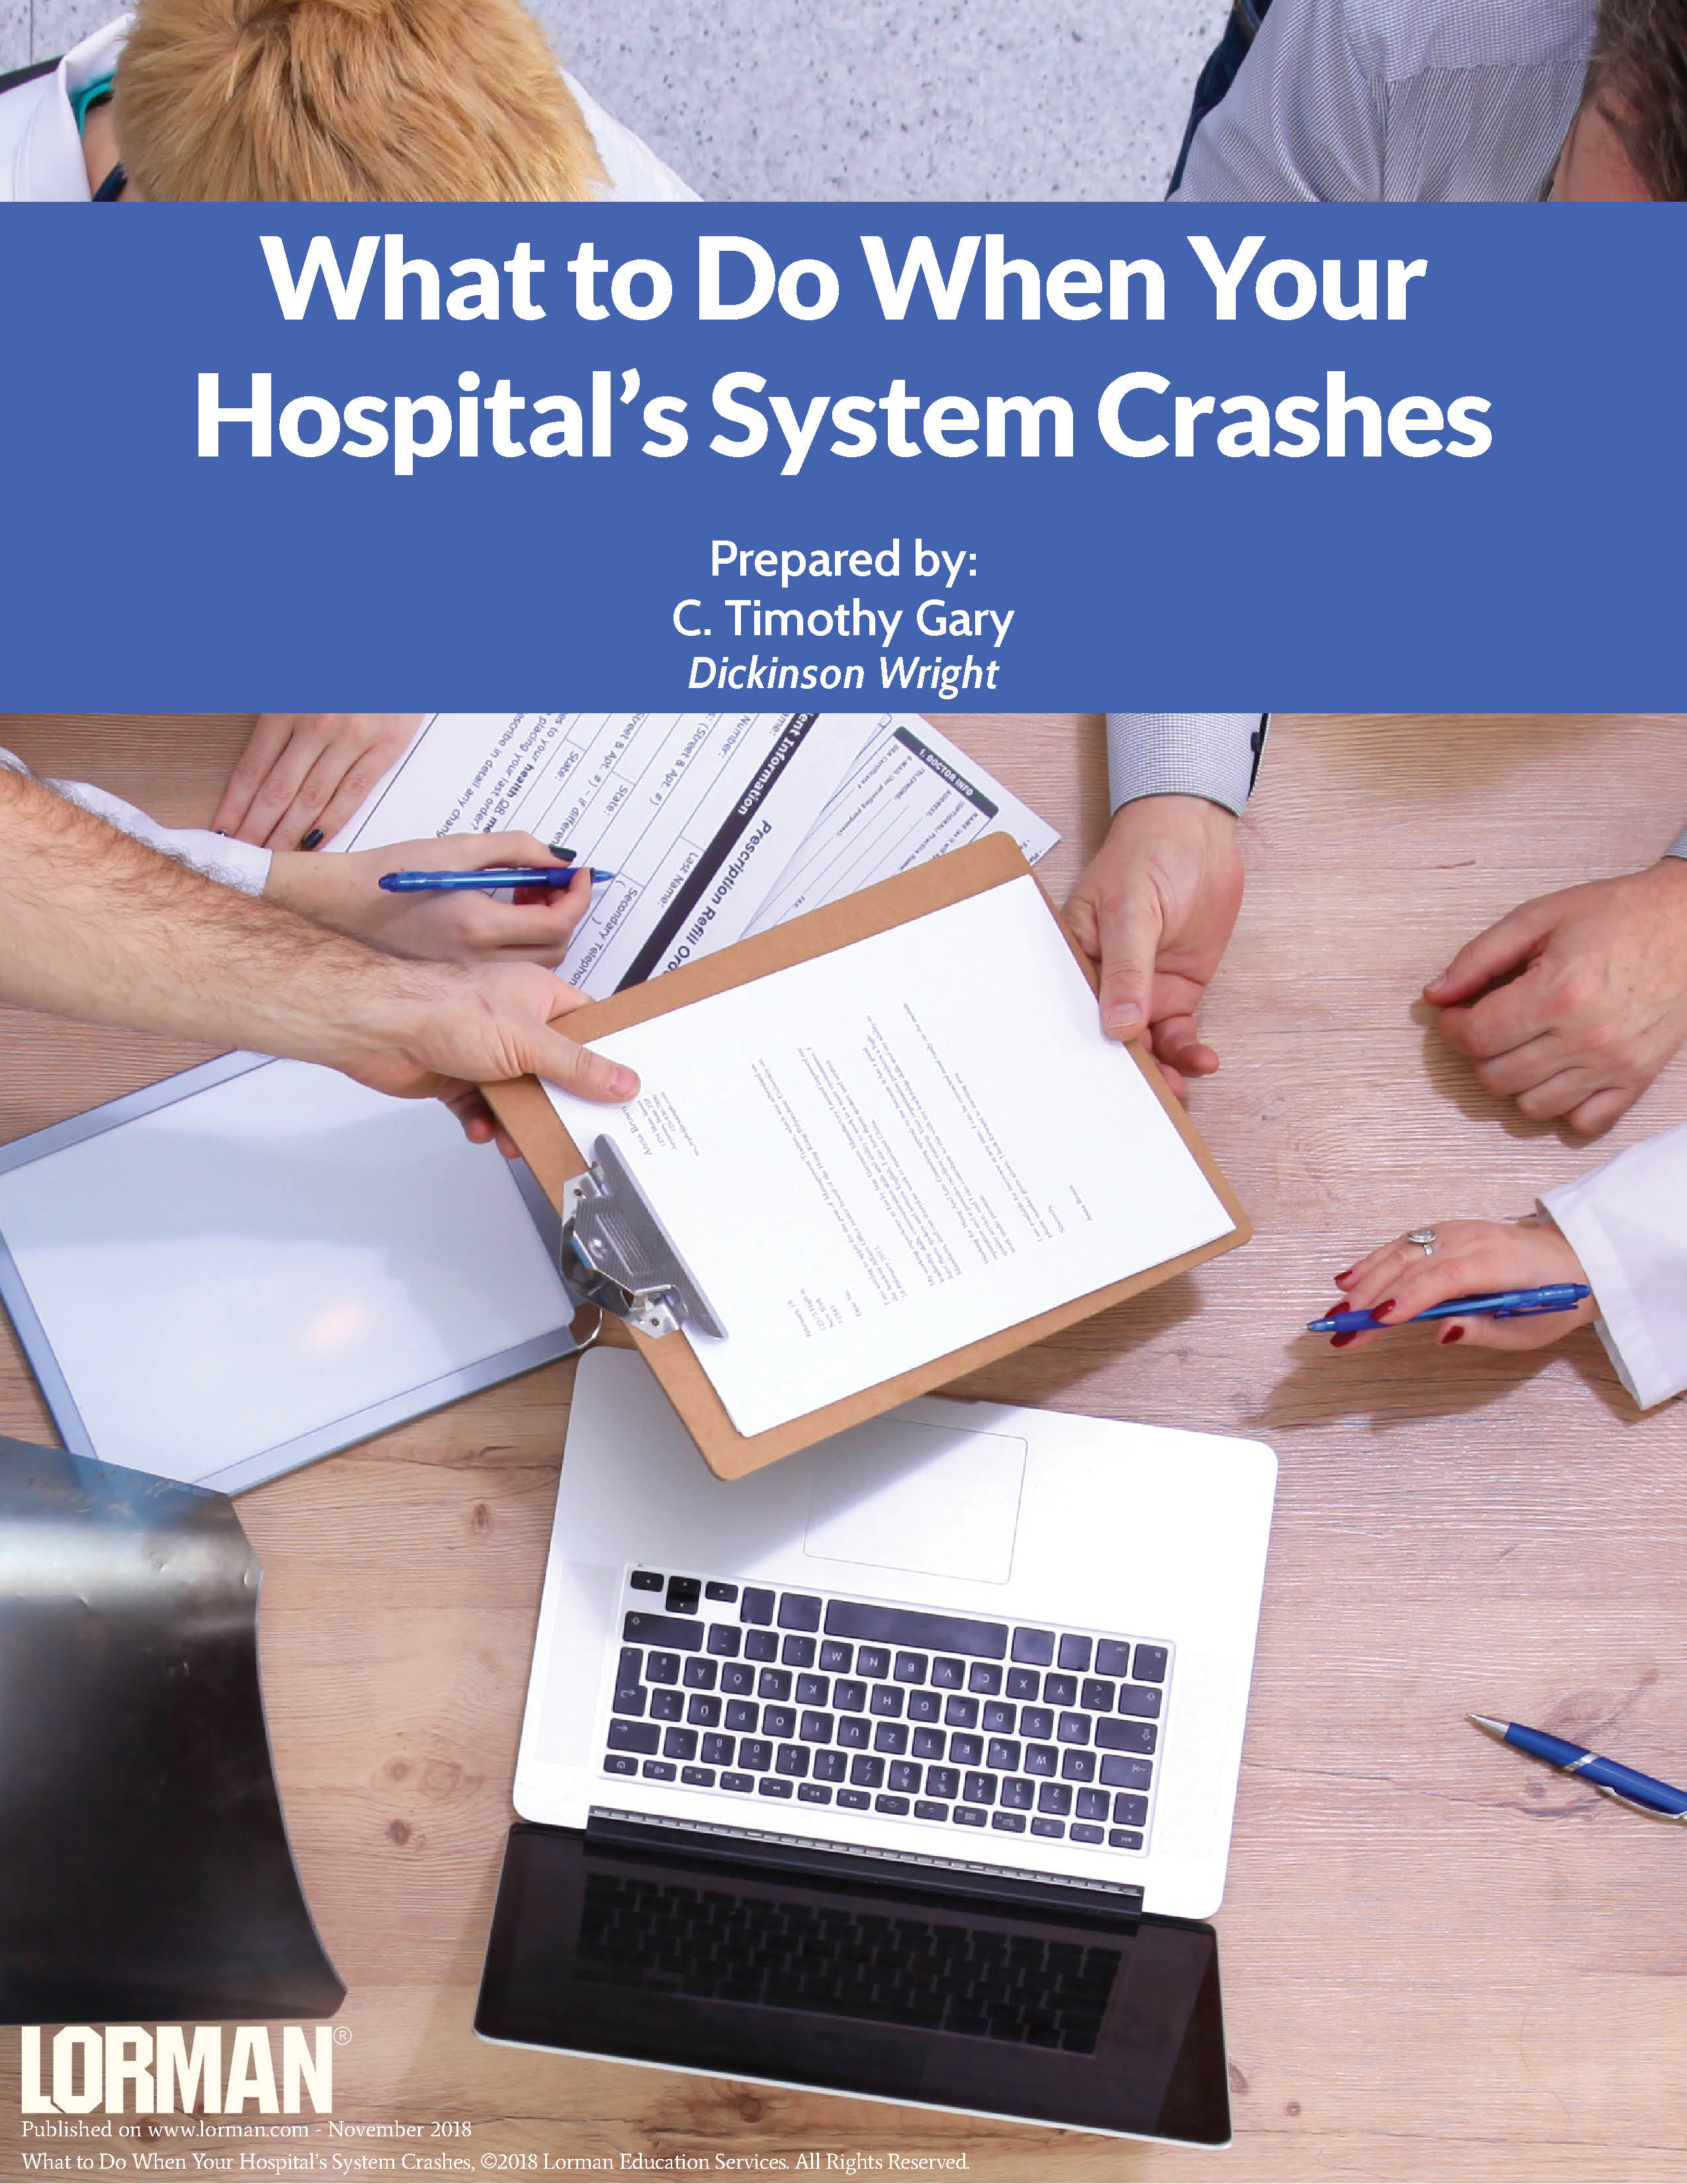 What to Do When Your Hospital’s System Crashes